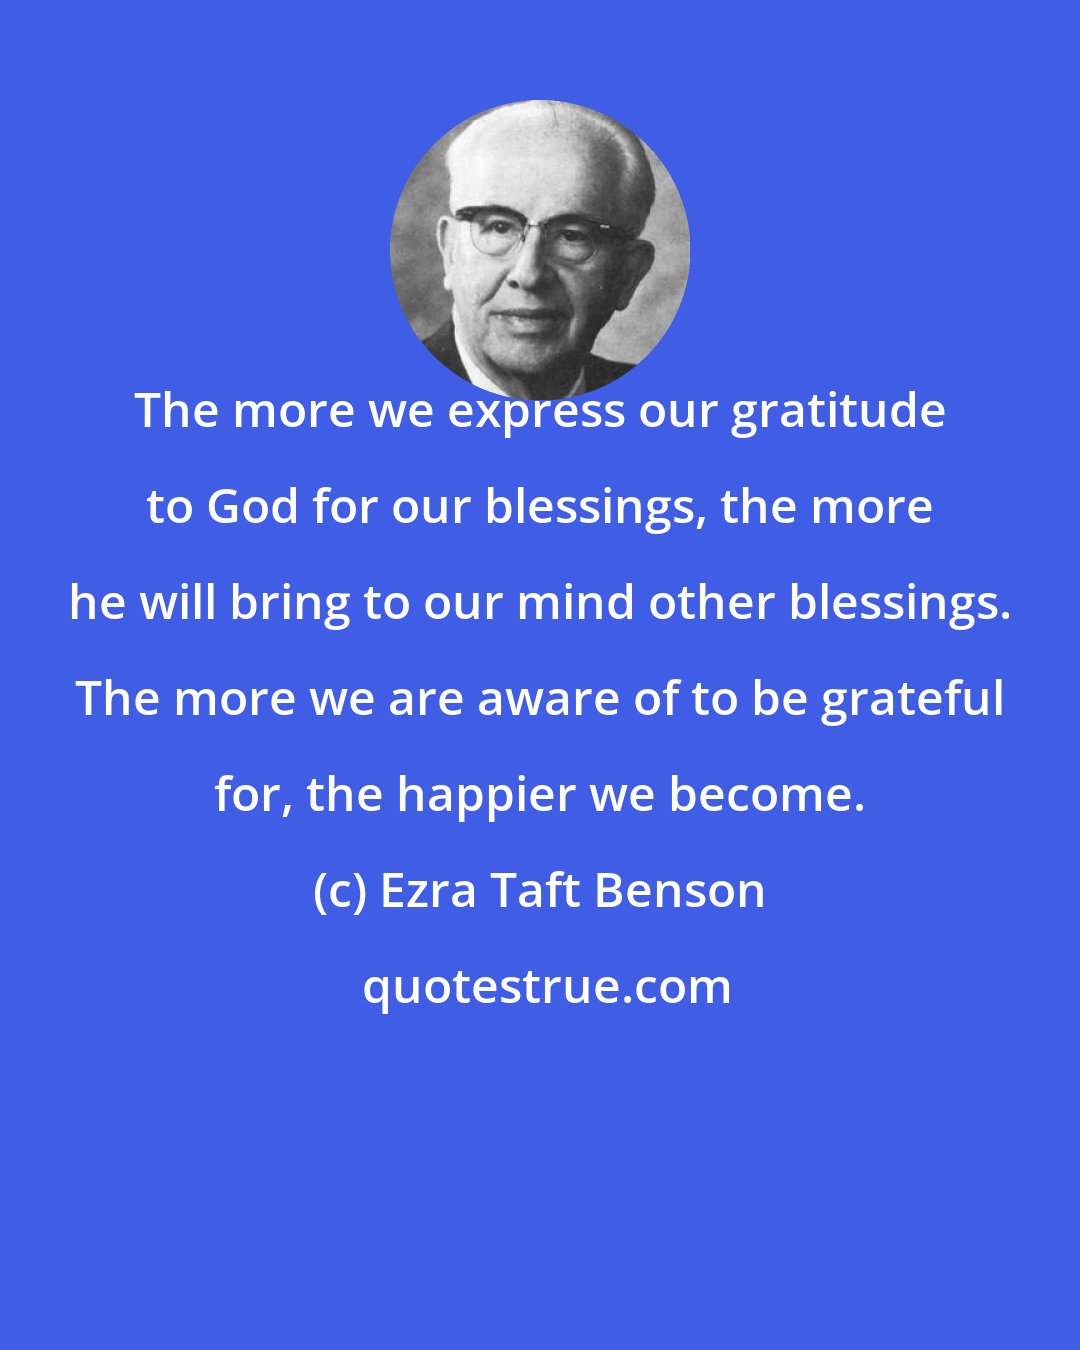 Ezra Taft Benson: The more we express our gratitude to God for our blessings, the more he will bring to our mind other blessings. The more we are aware of to be grateful for, the happier we become.